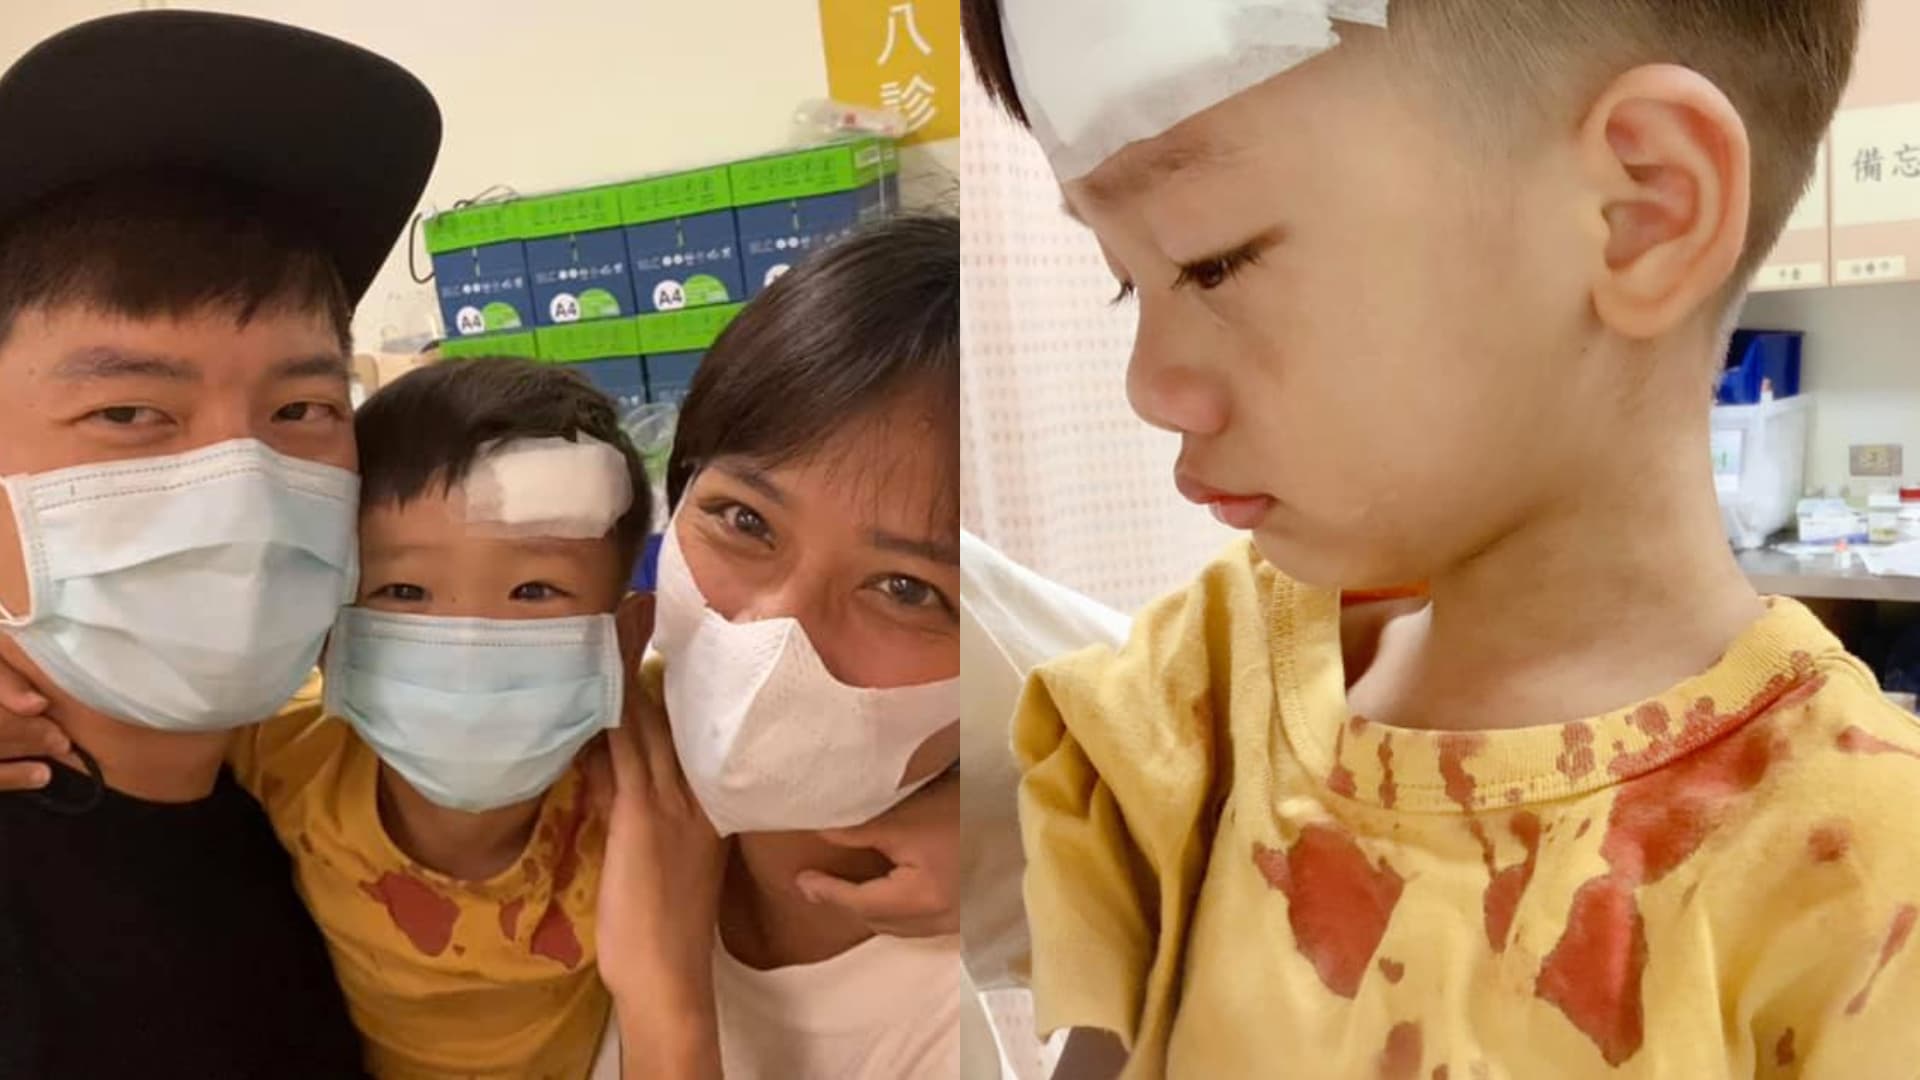 Chris Wang Praises Doctor For His Novel Way Of Treating His 3-Year-Old Son's Head Injury